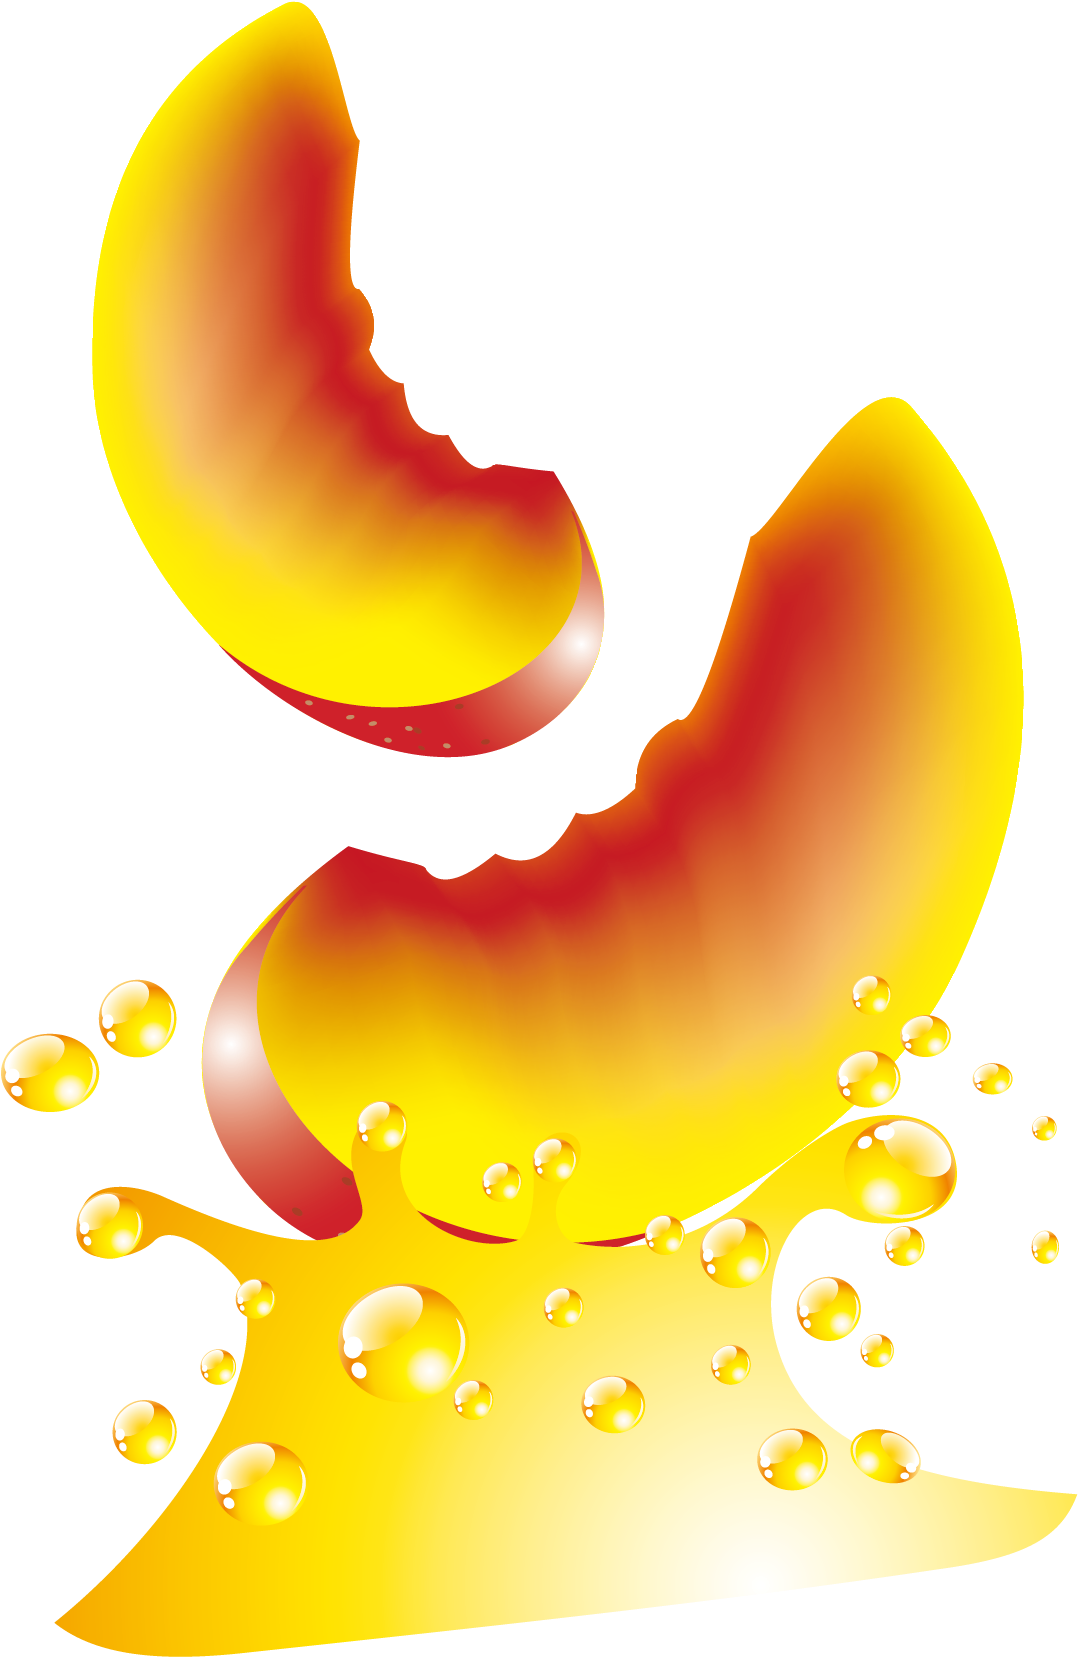 Abstract Apple Bite Bubbles PNG image